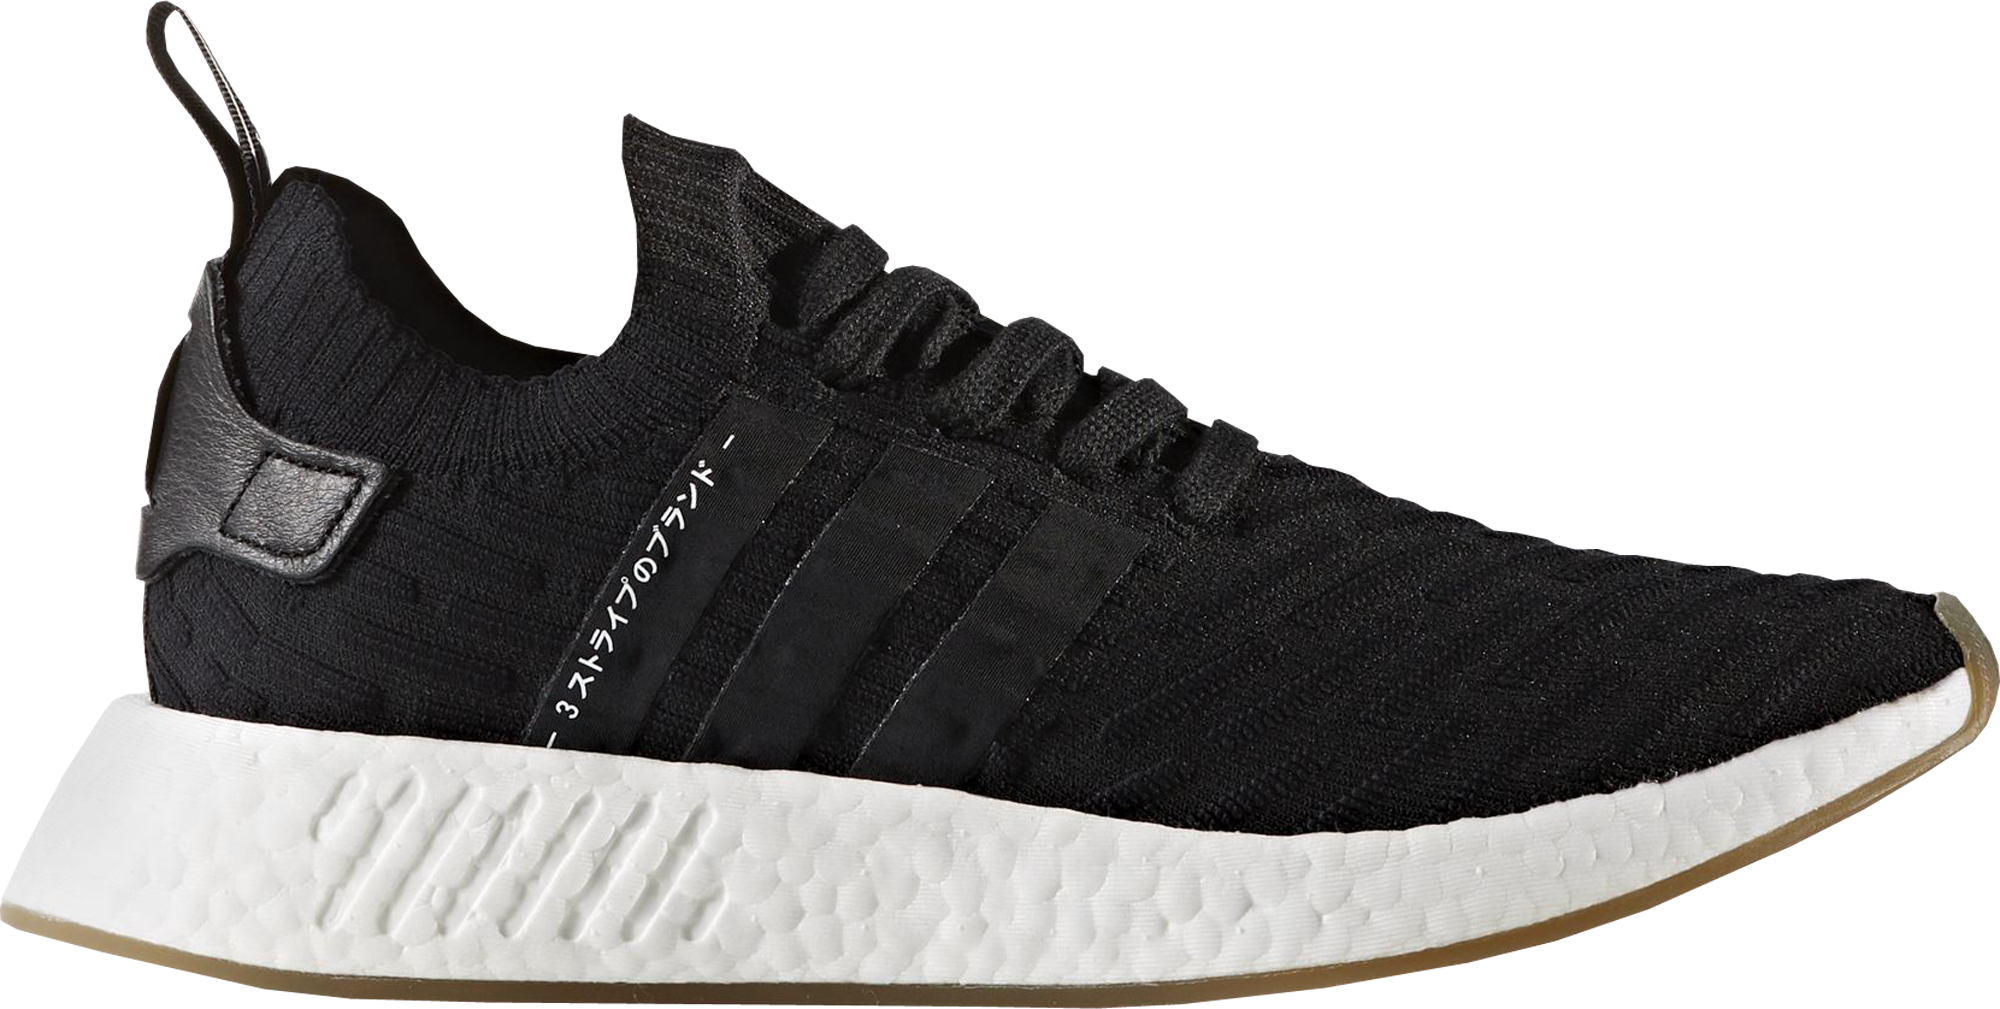 adidas NMD R2 Japan Core Black - BY9696